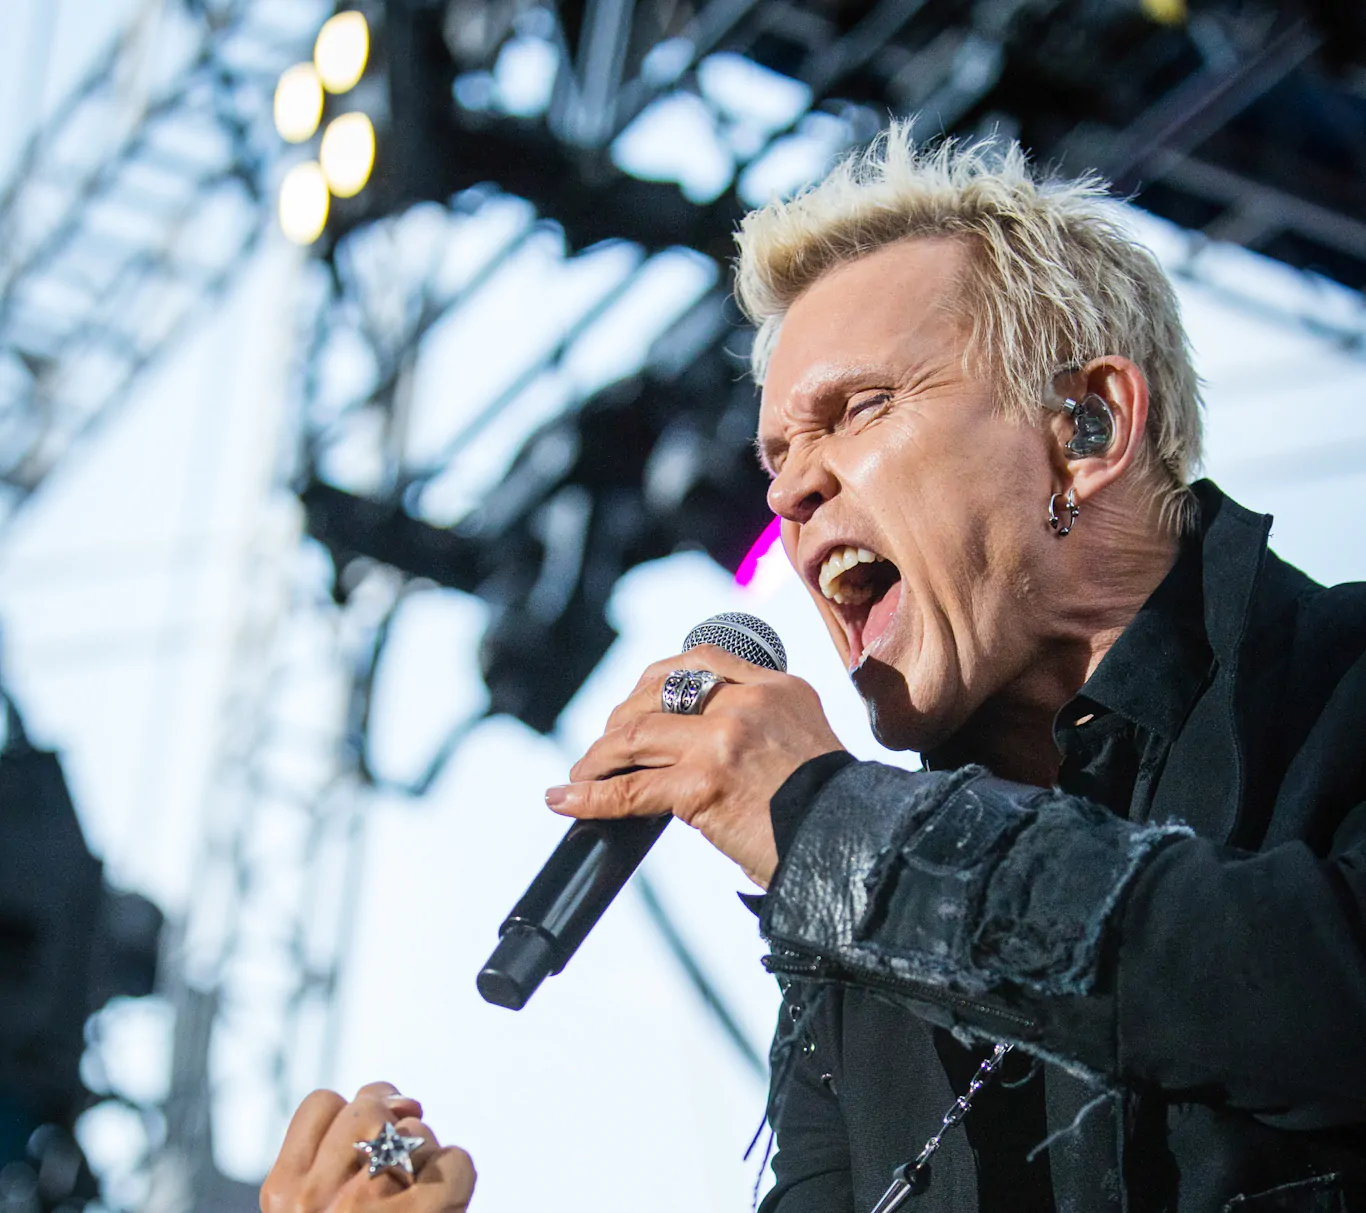 BILLY IDOL adds TOYAH to line-up for Roadside Tour in October